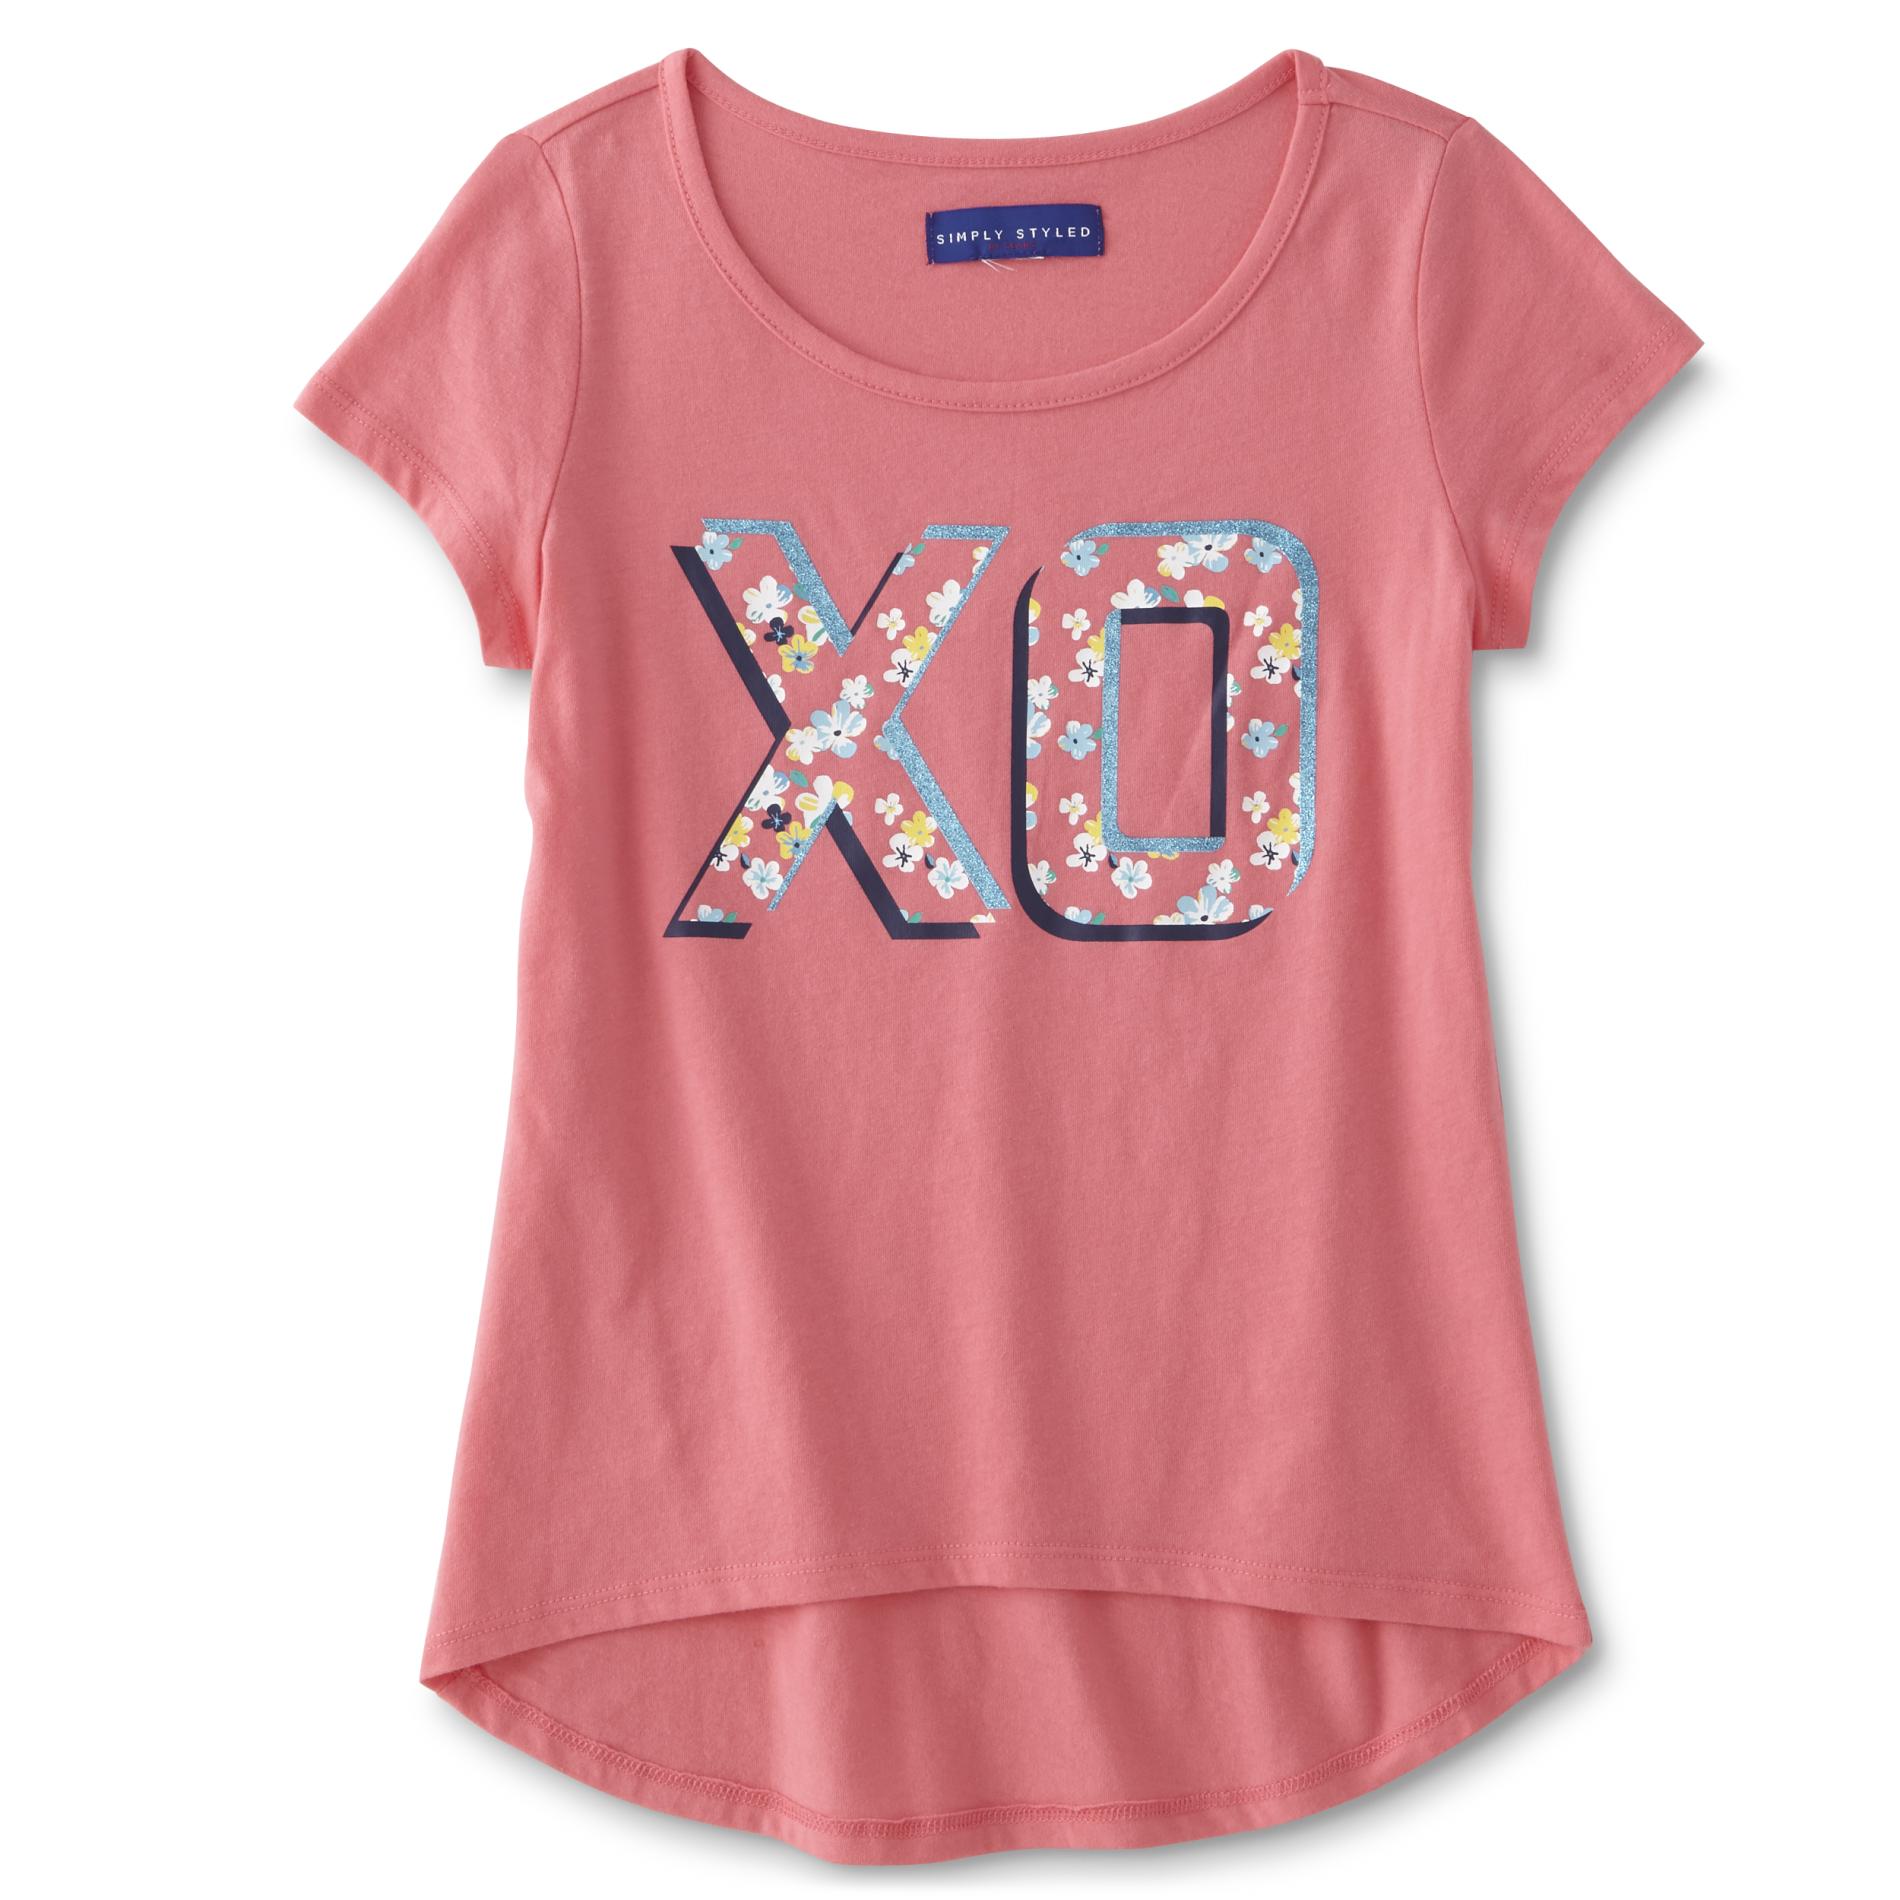 Simply Styled Girls' Graphic T-Shirt - XO